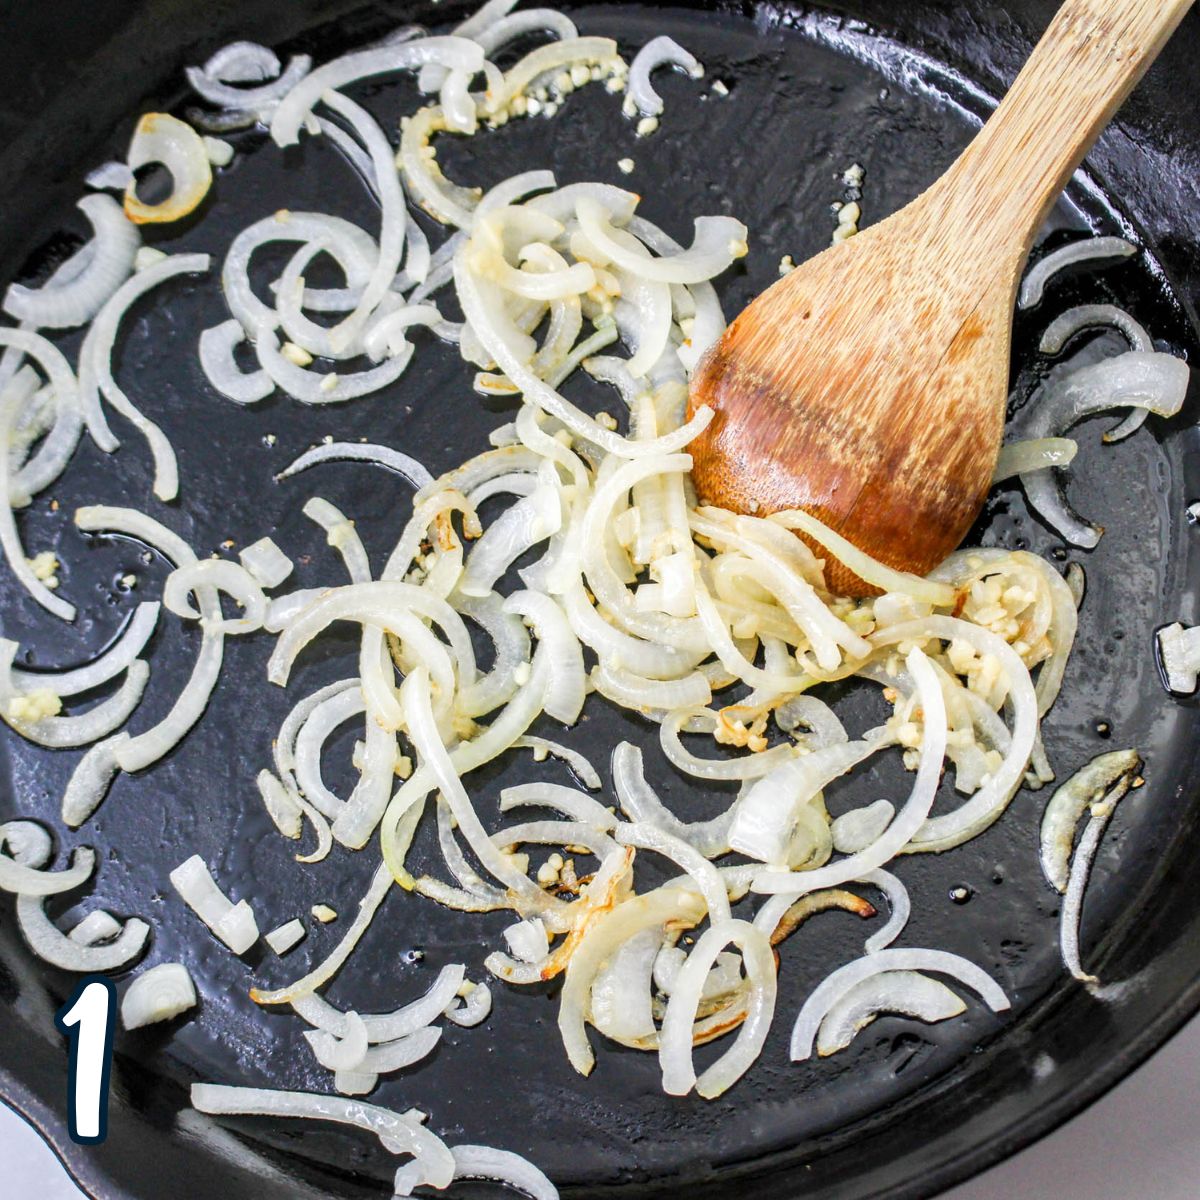 Onions in a pan with a wooden spoon.